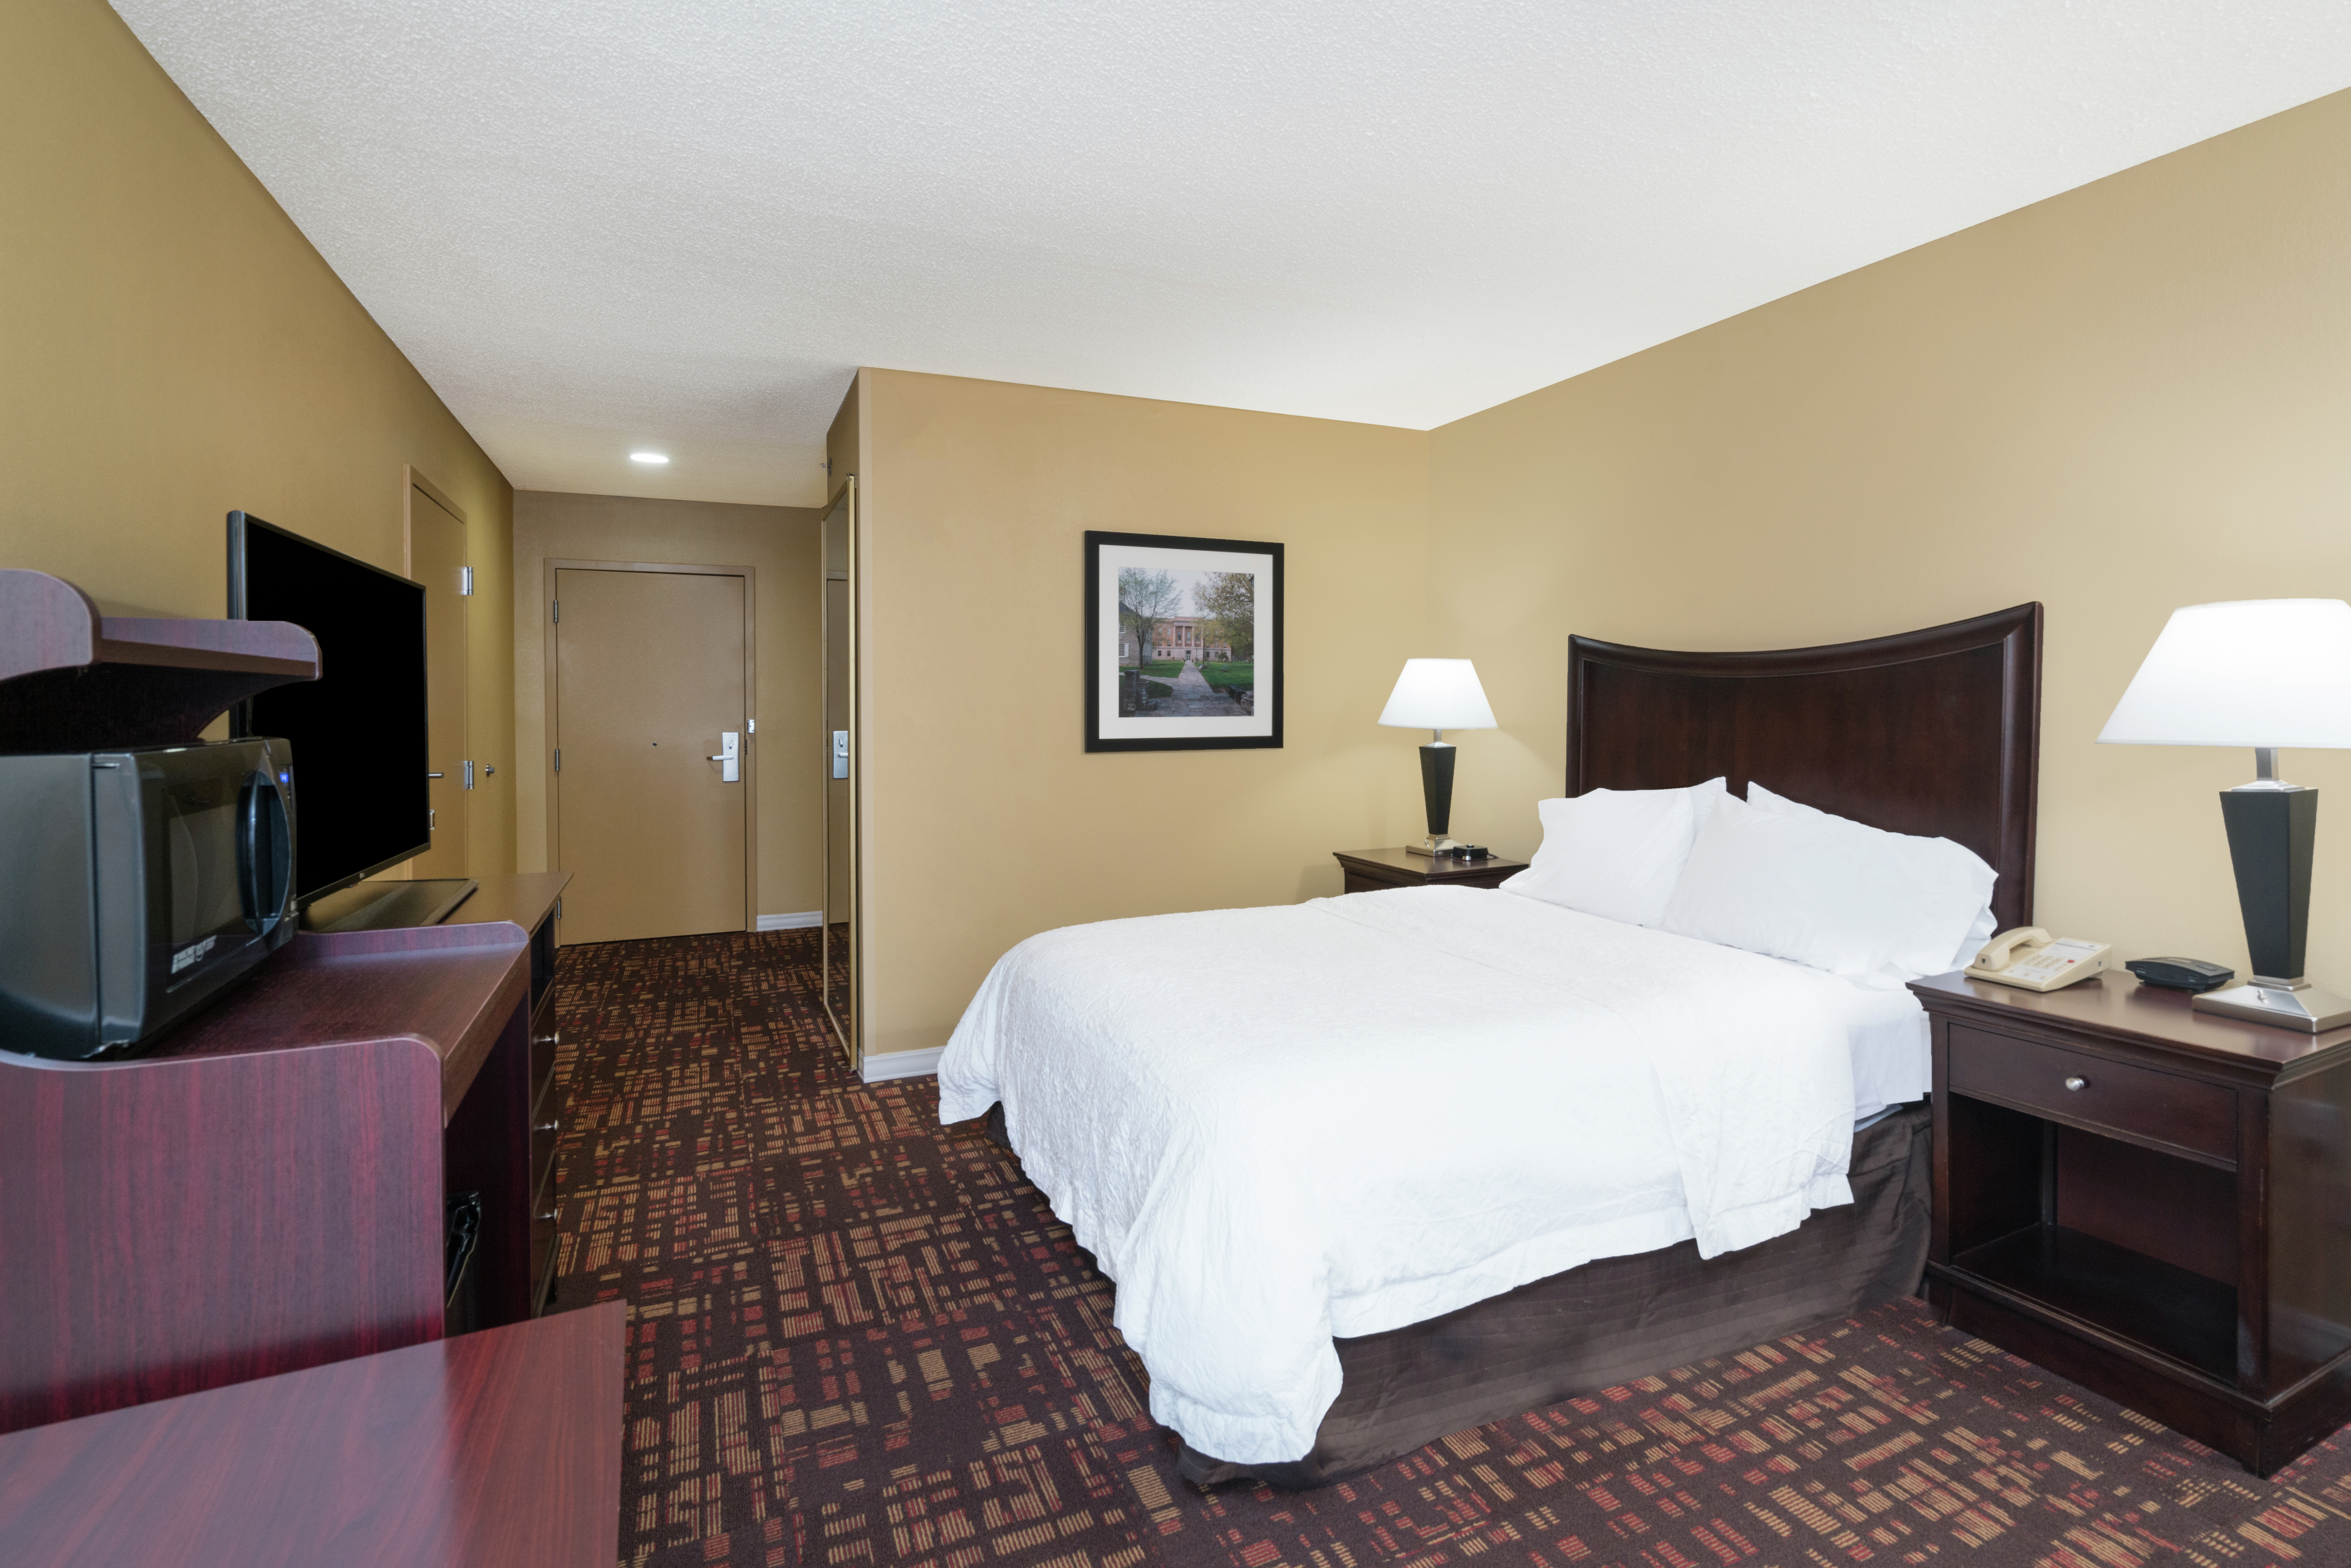 Queen Bed, Work Desk, Hospitality Center, TV, and Entry in Accessible Room